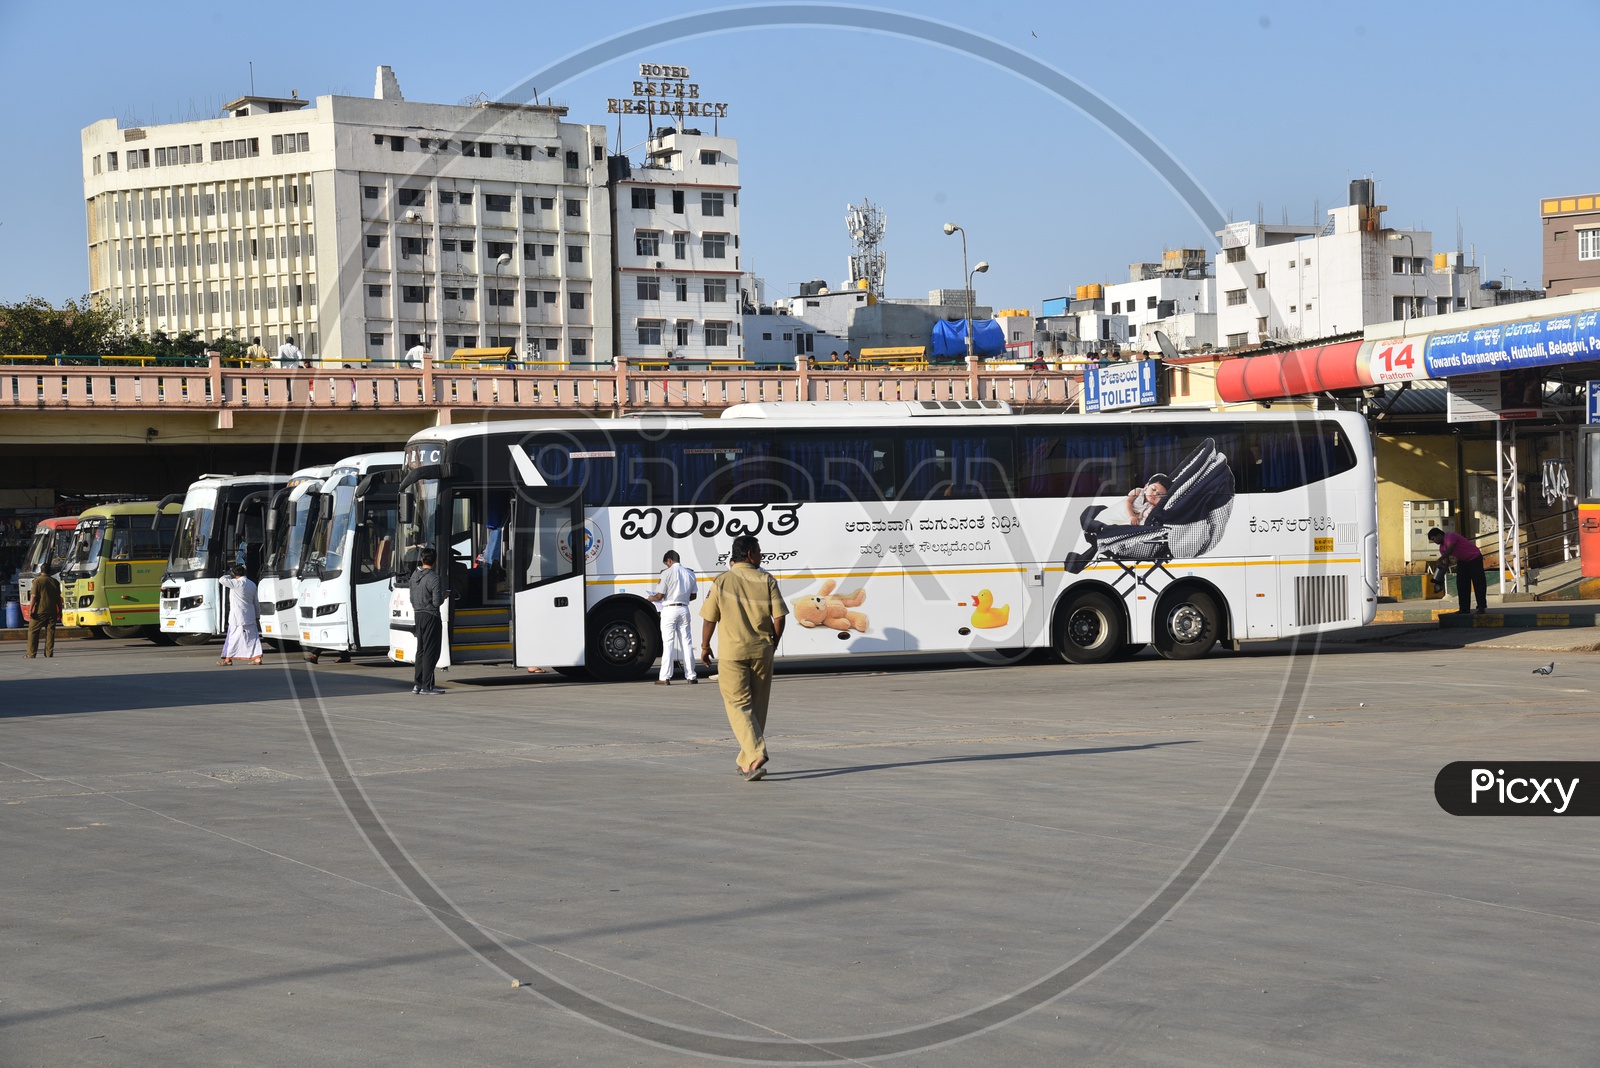 Airavat club class buses at platform 14 in Majestic bus station, Bangalore